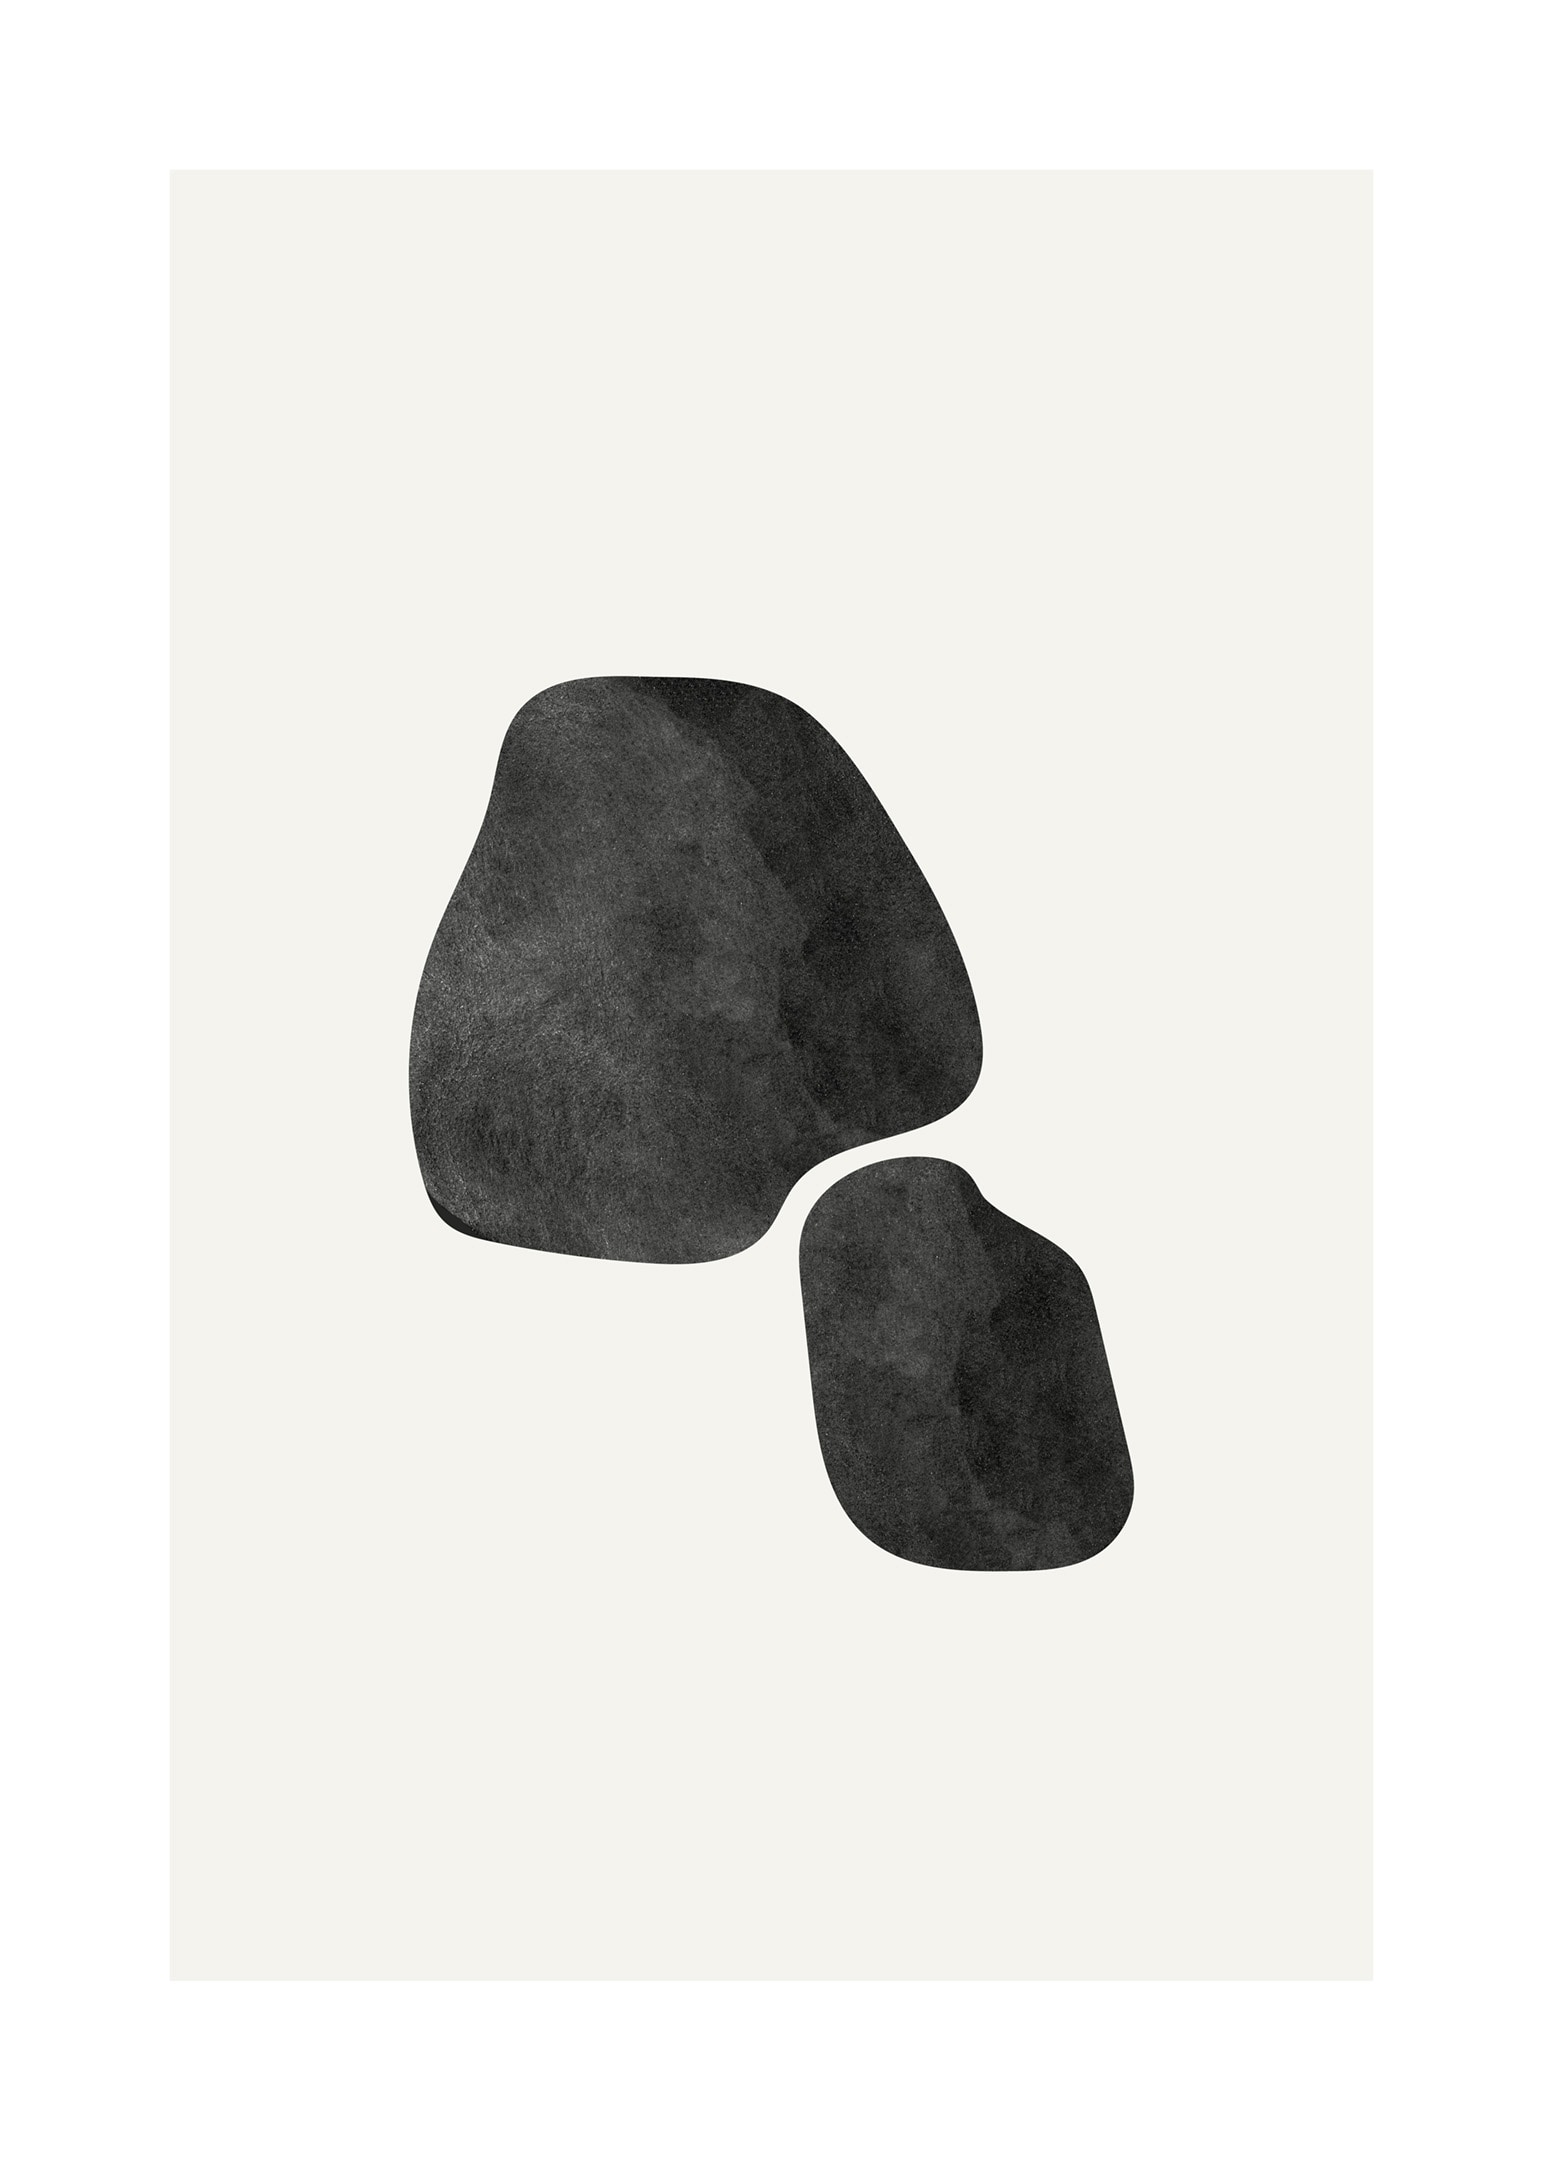 Two black shapes poster